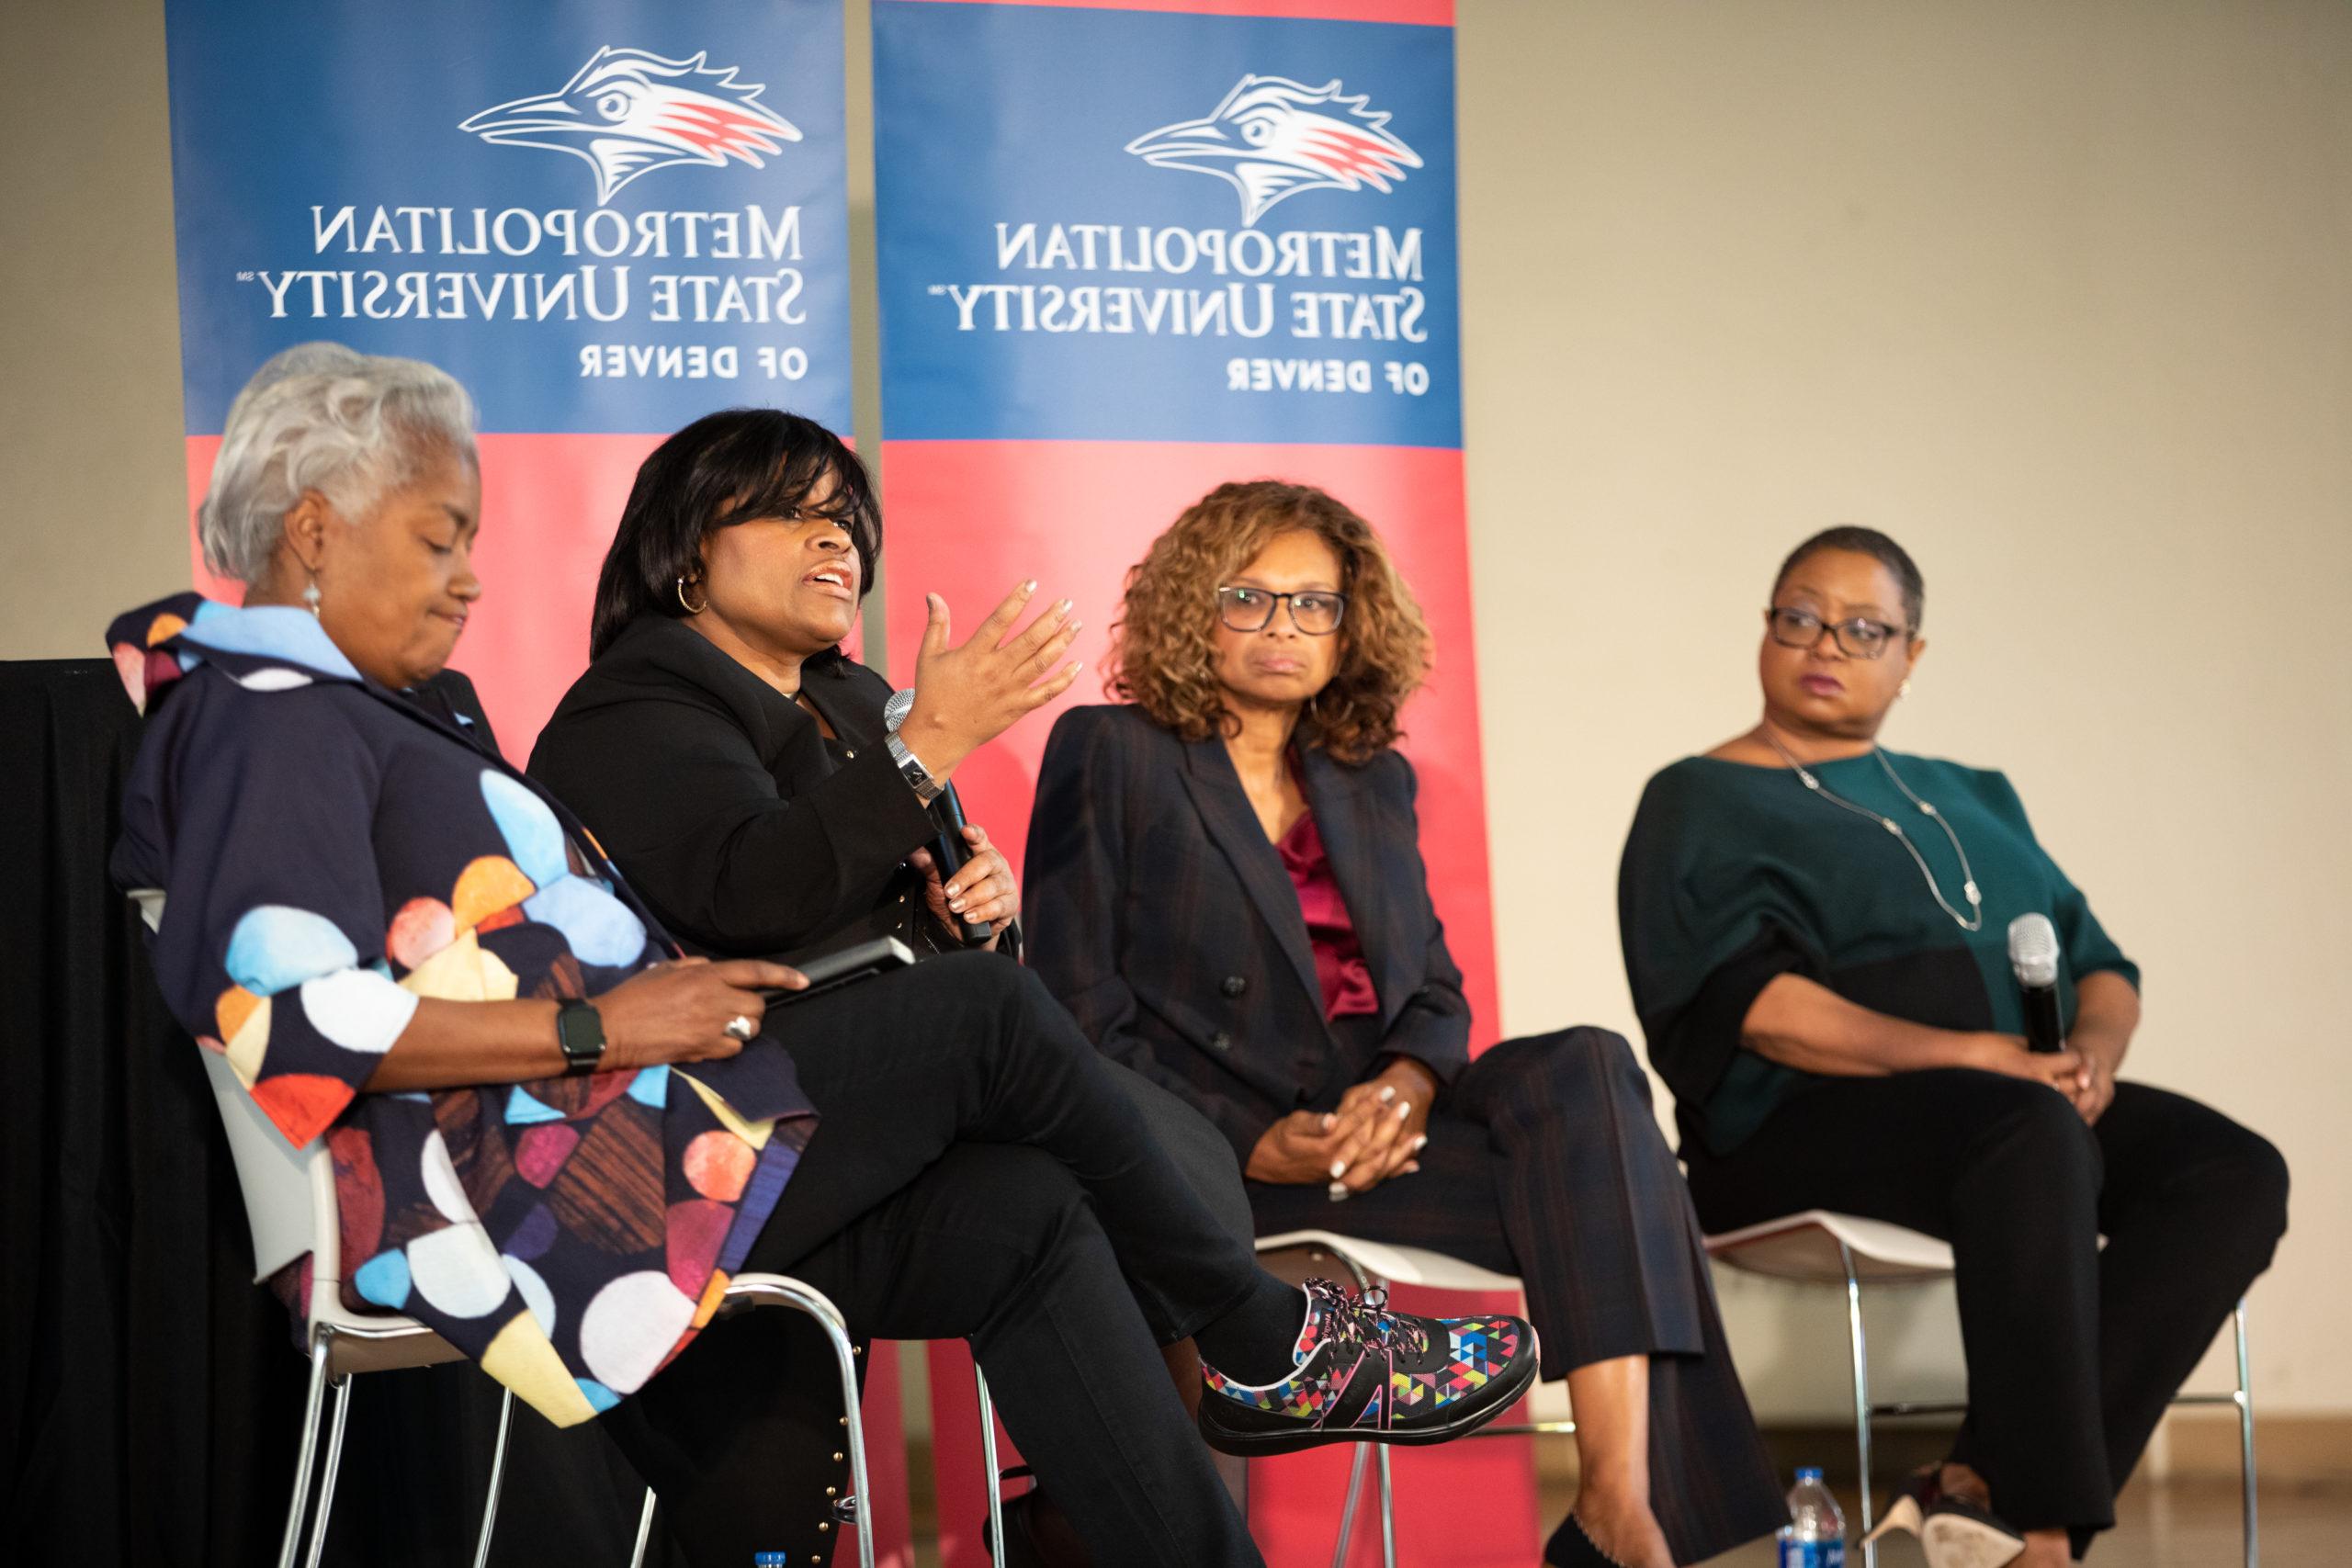 President's Speaker Series PRESIDENT'S SPEAKER SERIES, For Colored Girls Who Have Considered Politics, Donna Brazile, Yolanda Caraway, Leah Daughtry, Minyon Moore, 事件, 演讲者